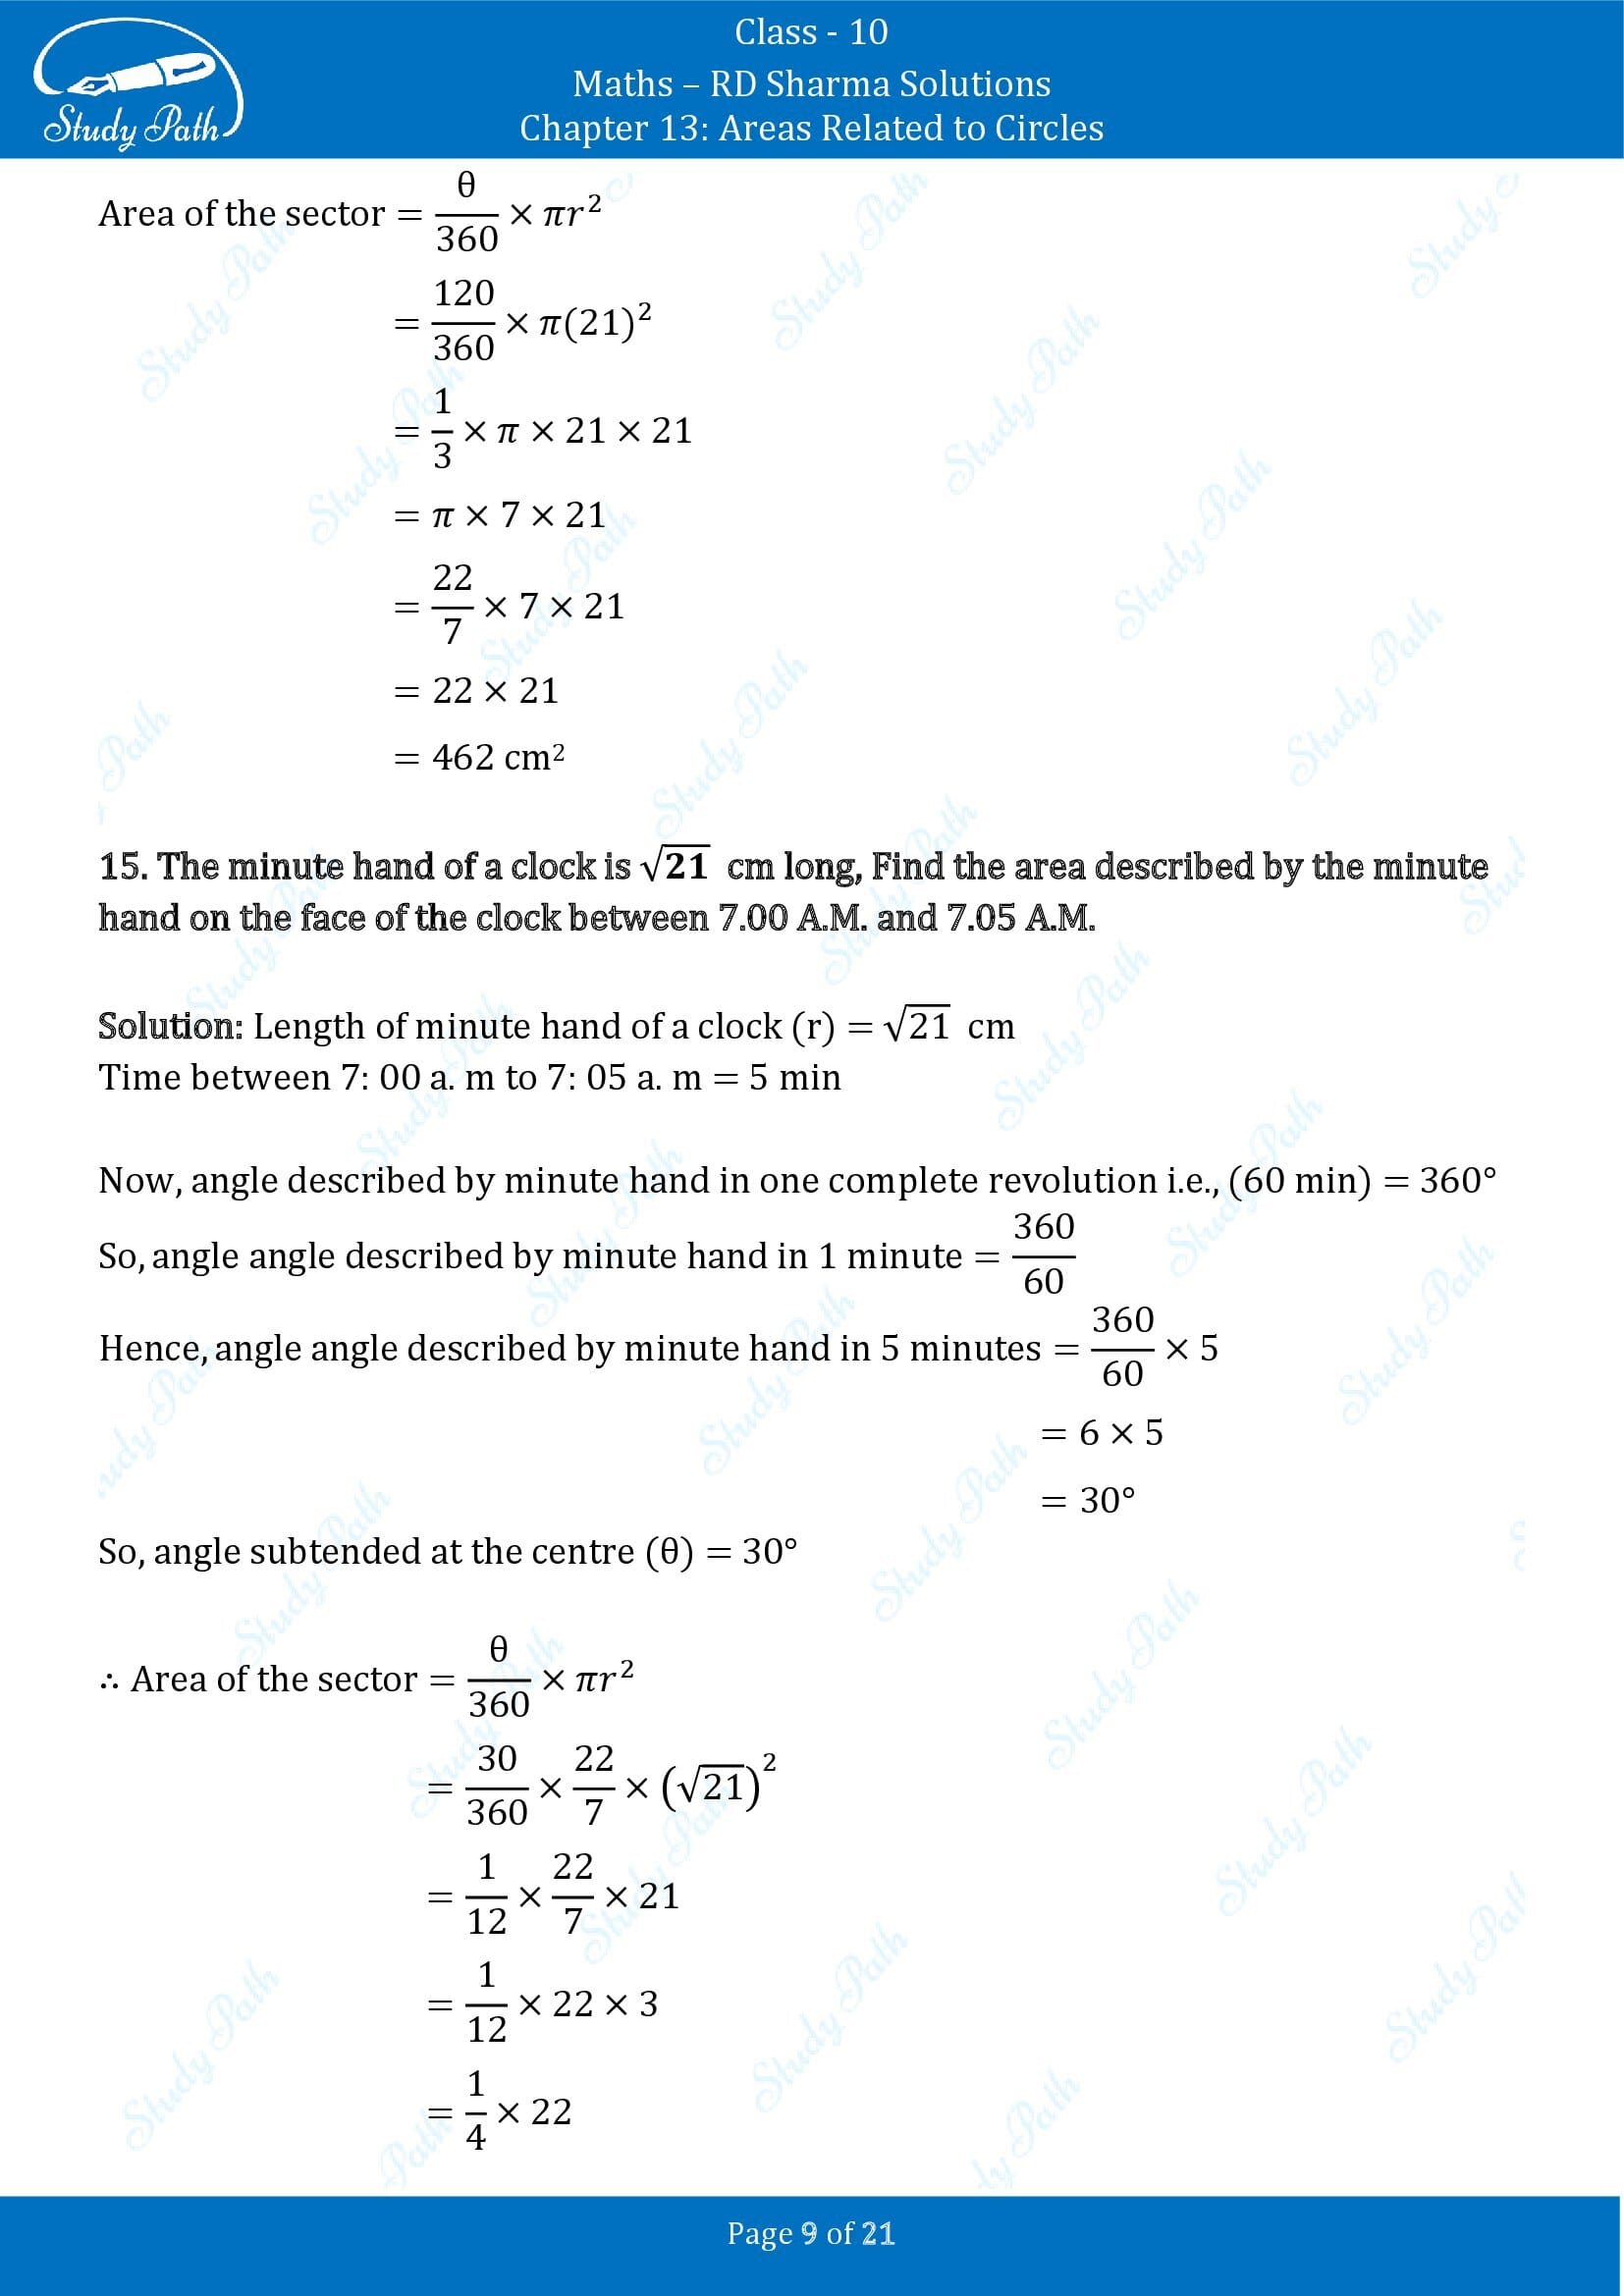 RD Sharma Solutions Class 10 Chapter 13 Areas Related to Circles Exercise 13.2 00009